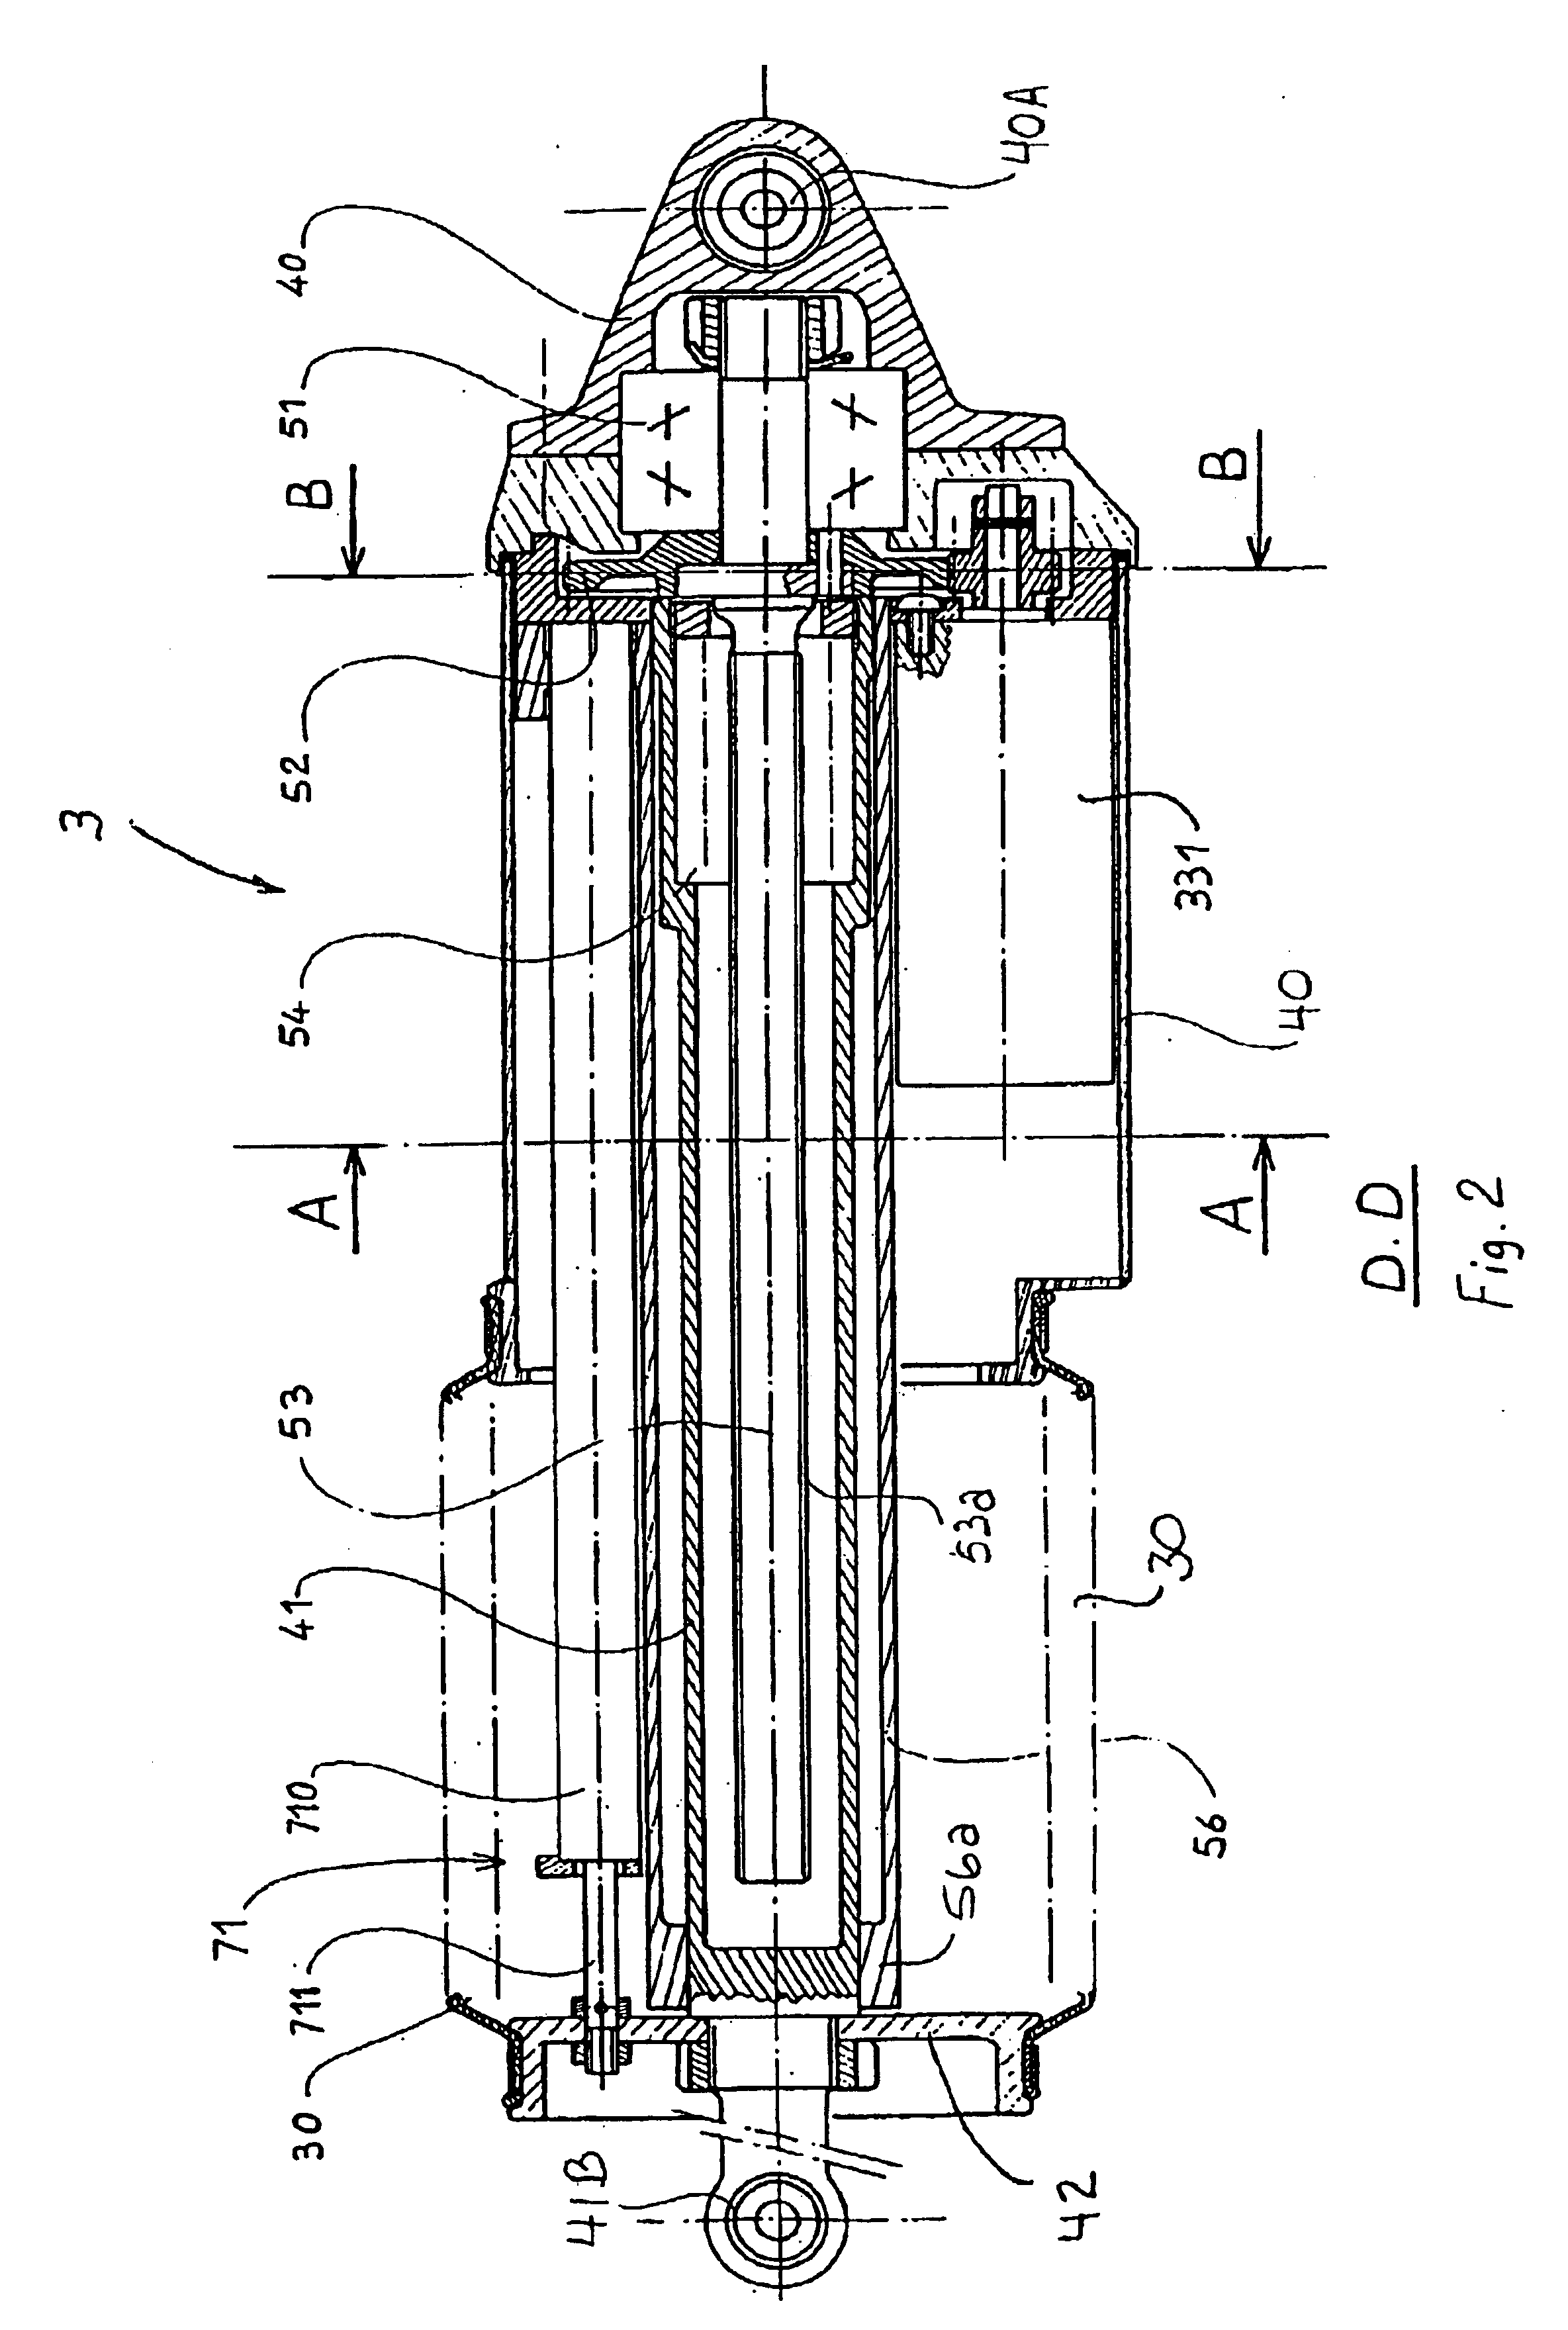 Electrical steering for vehicle, with triple redundancy